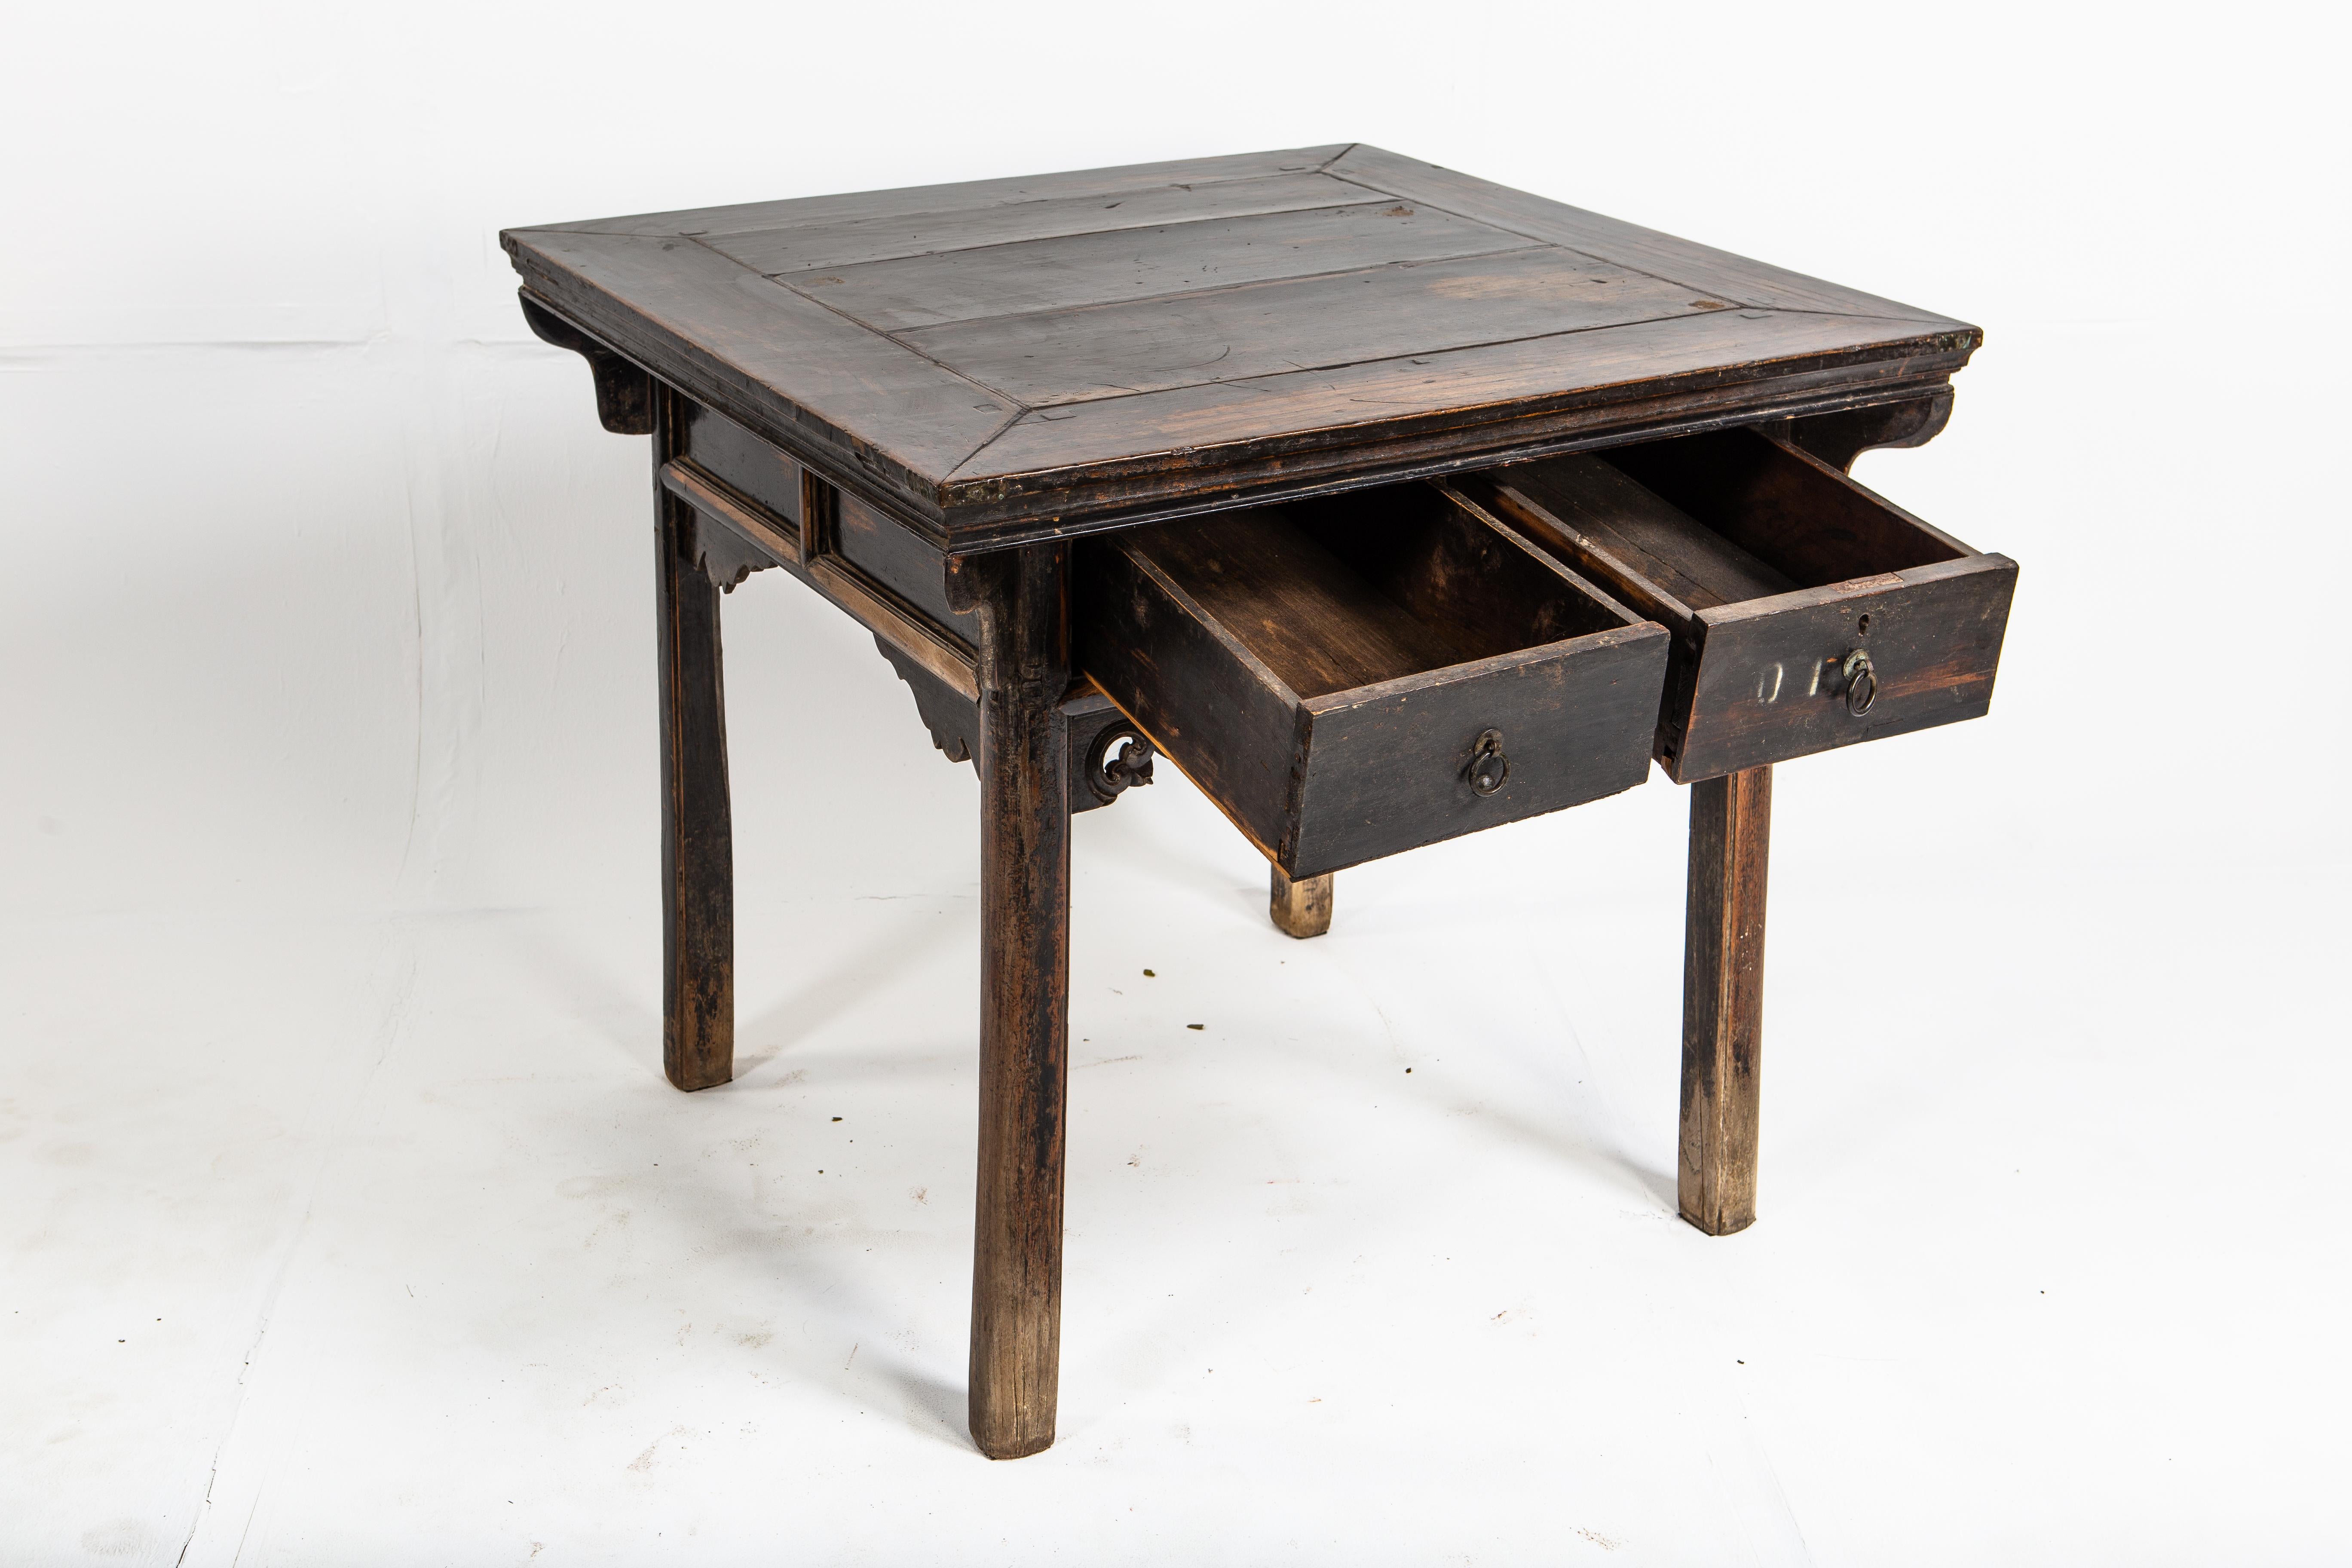 19th Century Late Qing Dynasty Square Table with Two Drawers